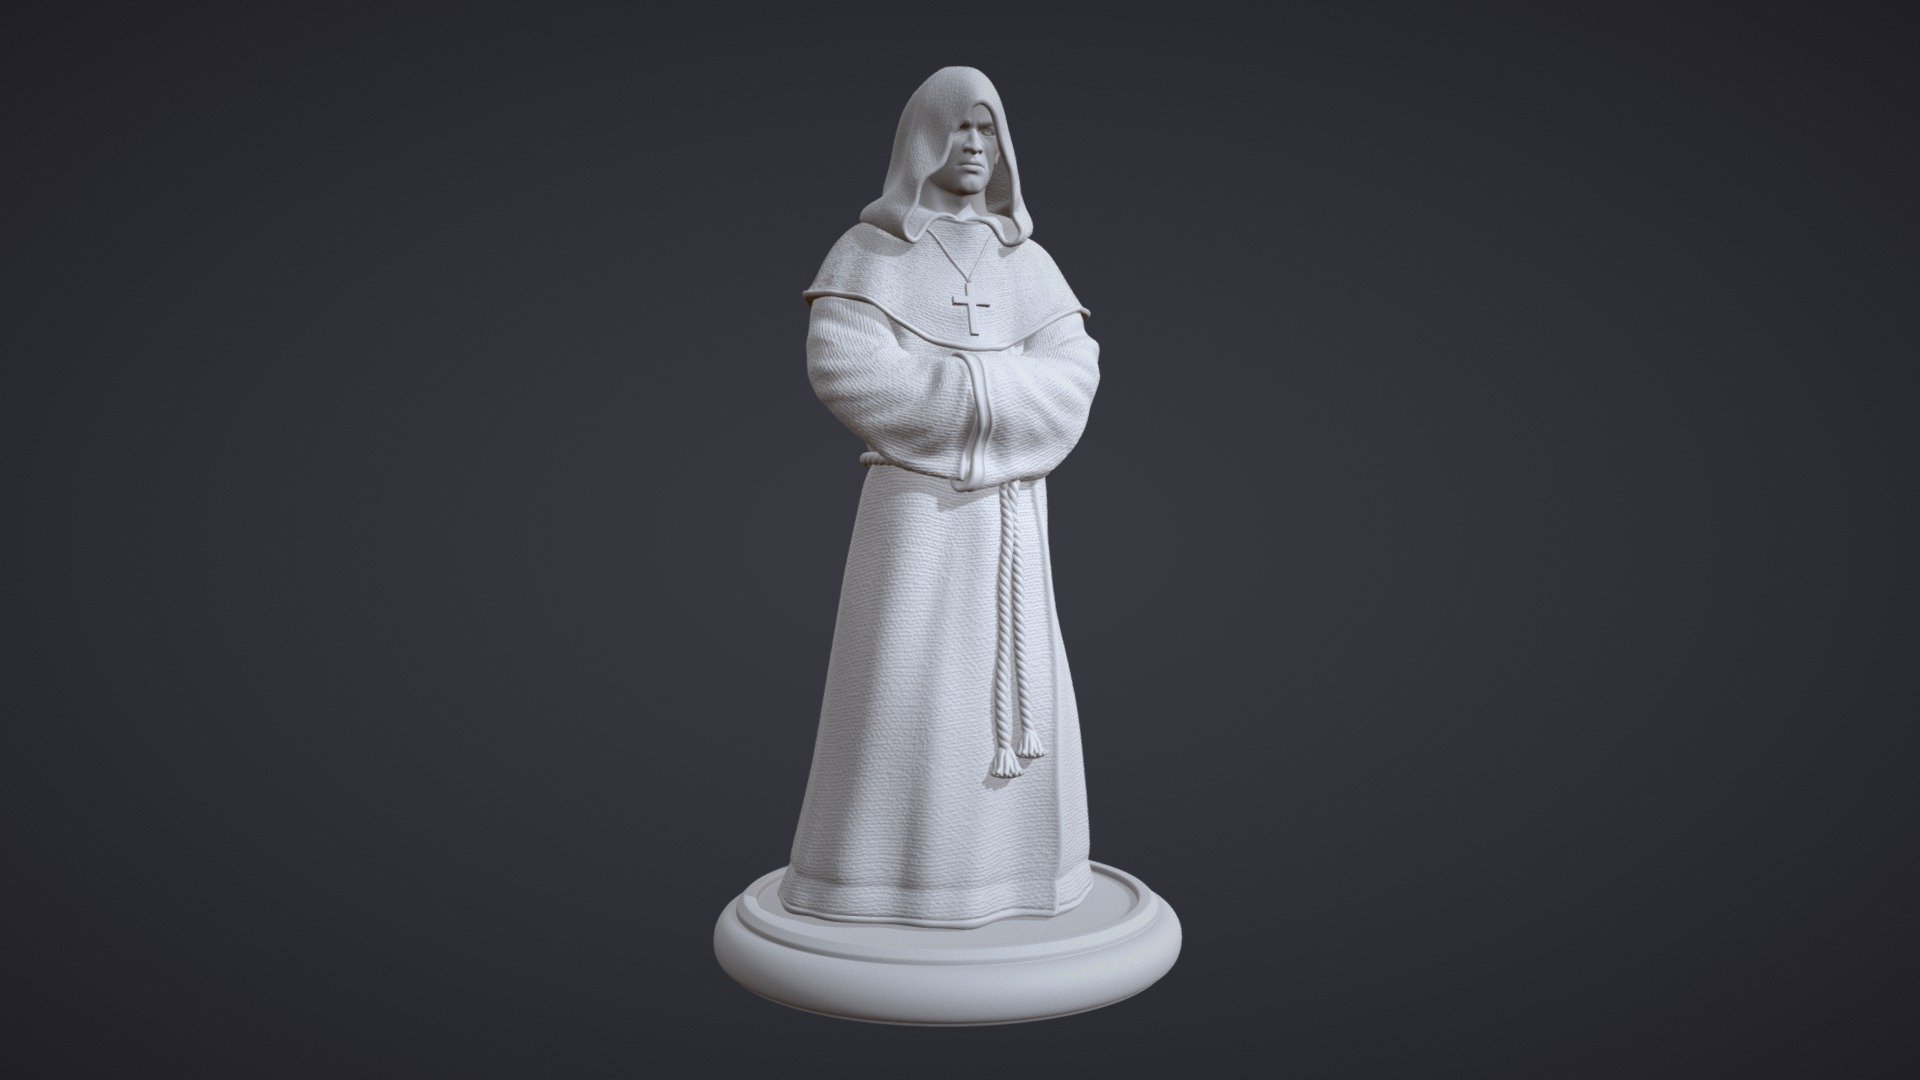 3D print your own Monk figure!

With this purchase you will get a digital version of a highly detailed monk sculpture. Prepared and tested for 3D printing. Hollowed inside to save material. Separated and keyed into 2 pieces (base and figure). Ideal print size in height is 7 inches (180 mm).

The file is available in .OBJ and .STL format.

Enjoy your 3D print and if you like, give him a nice paint 3d model